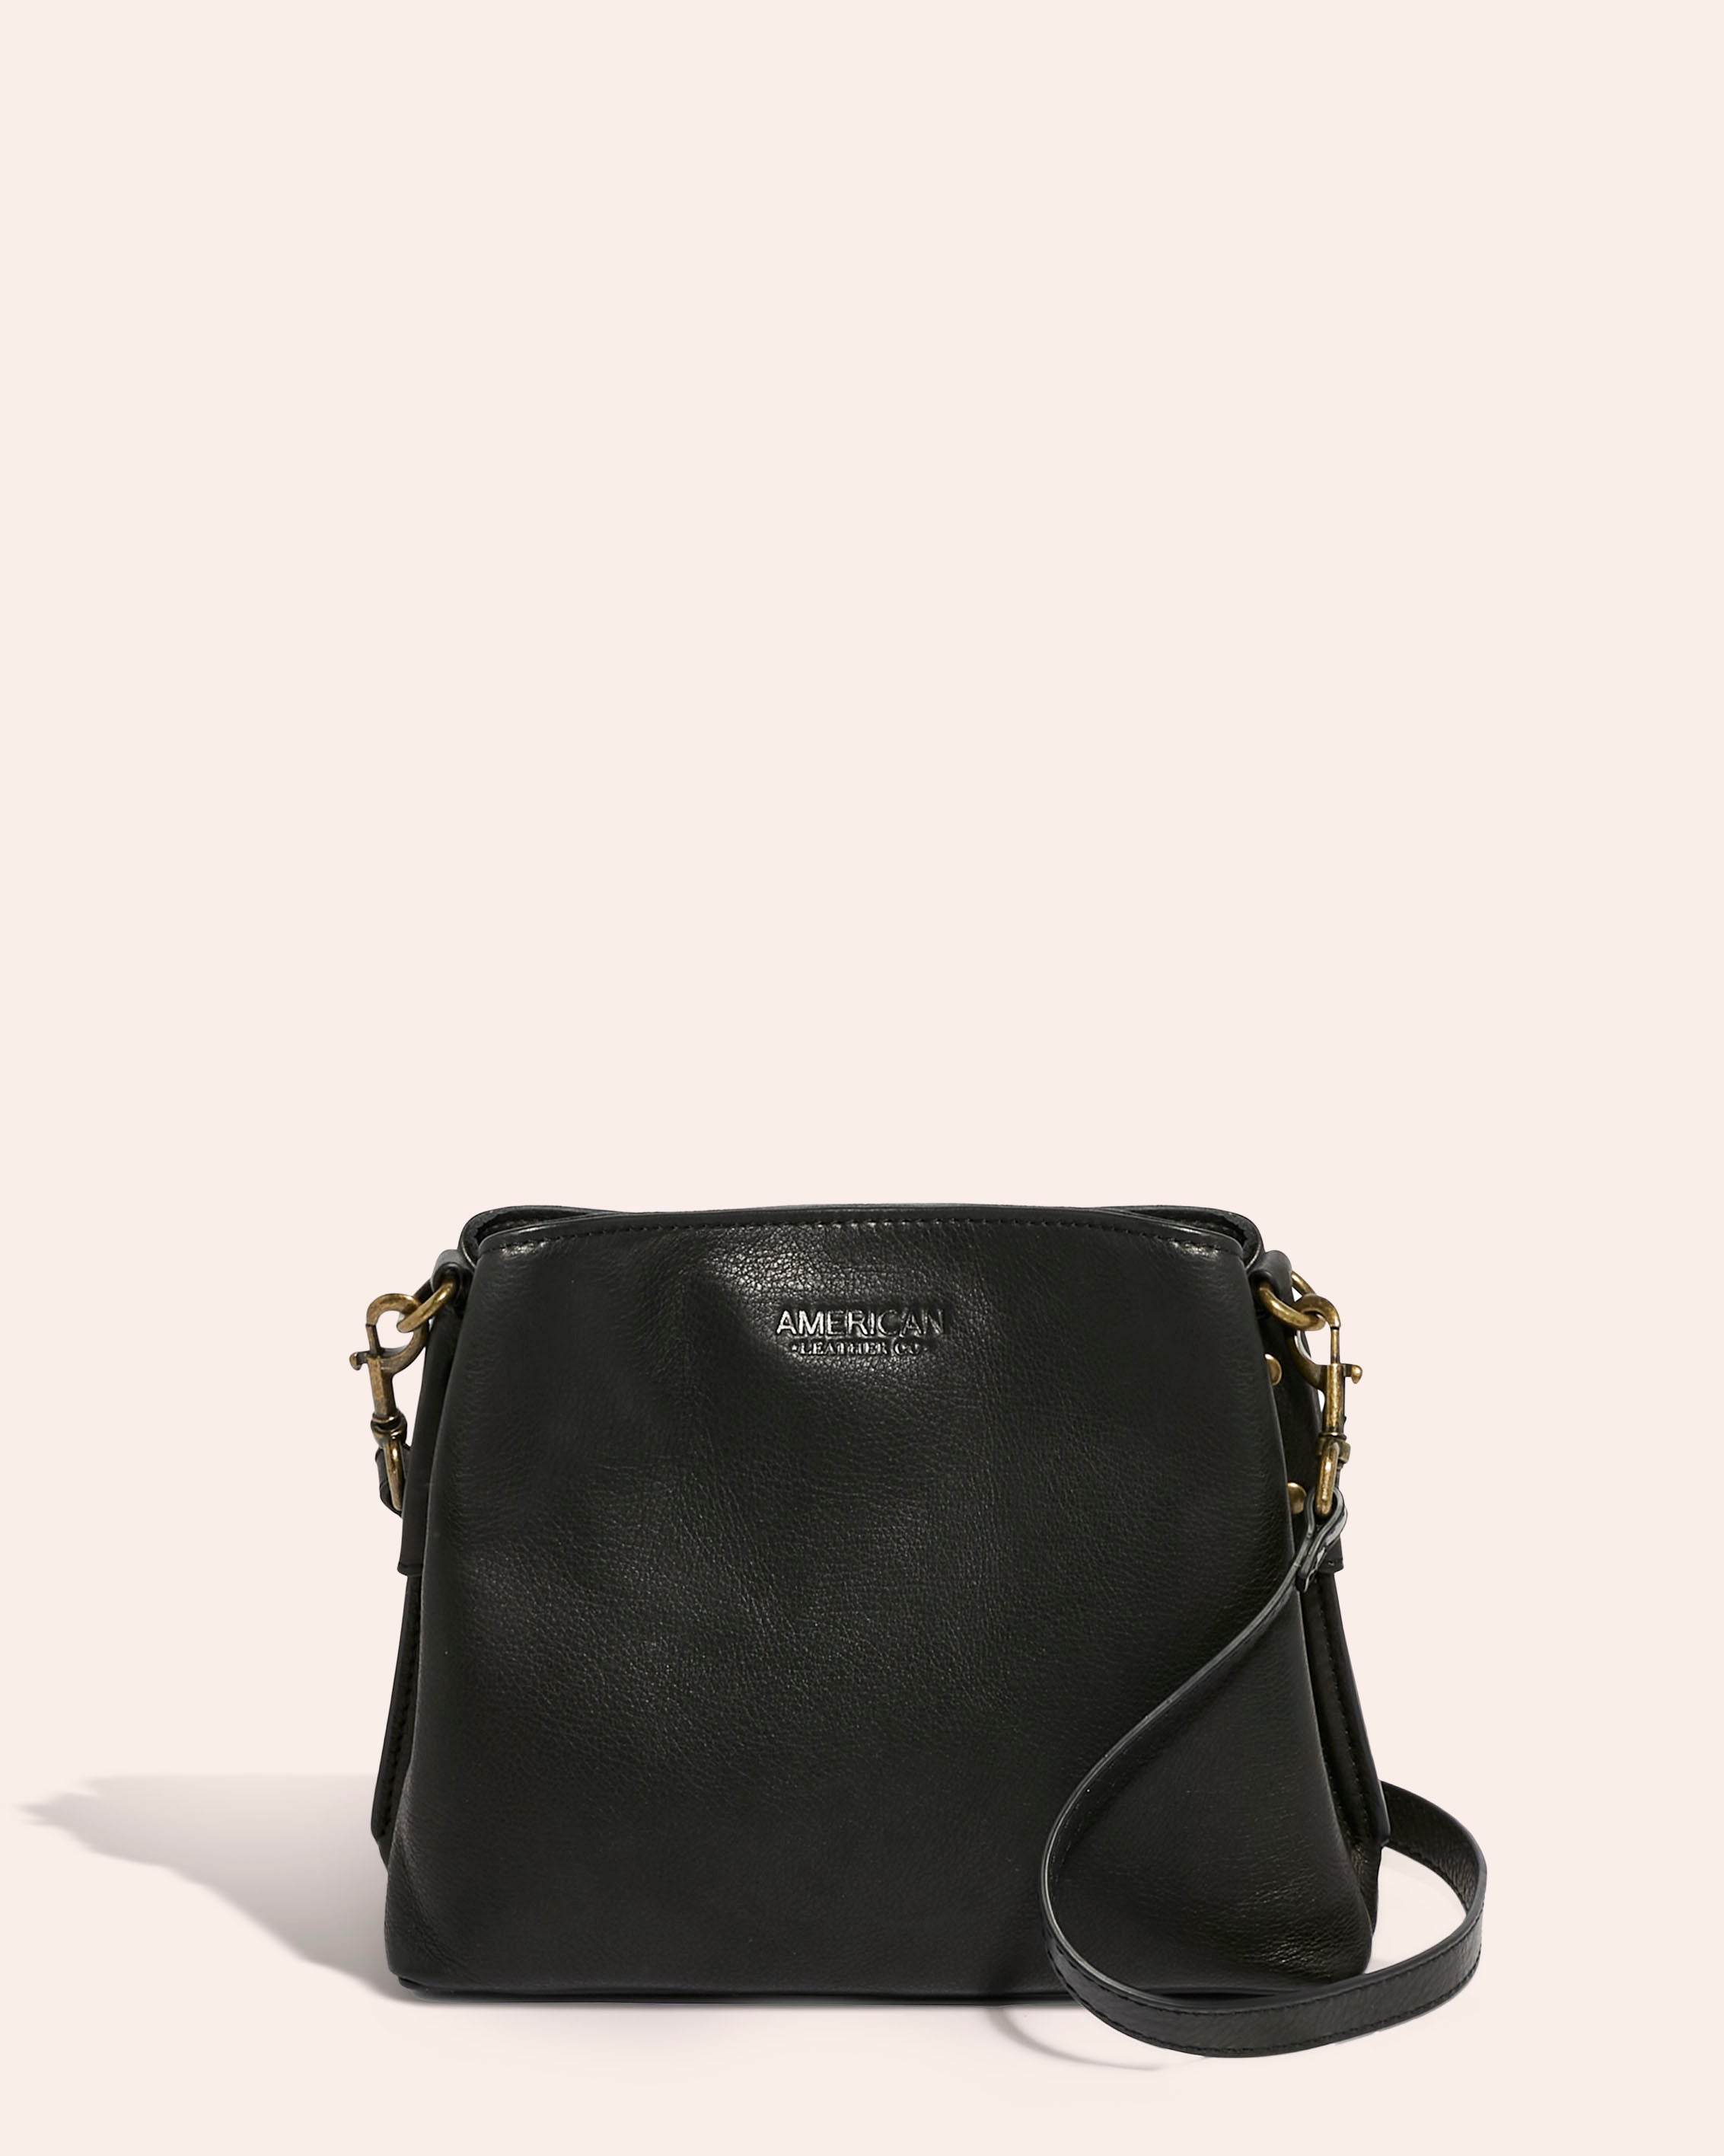 American Leather Co. Fairview Triple Entry Crossbody Black